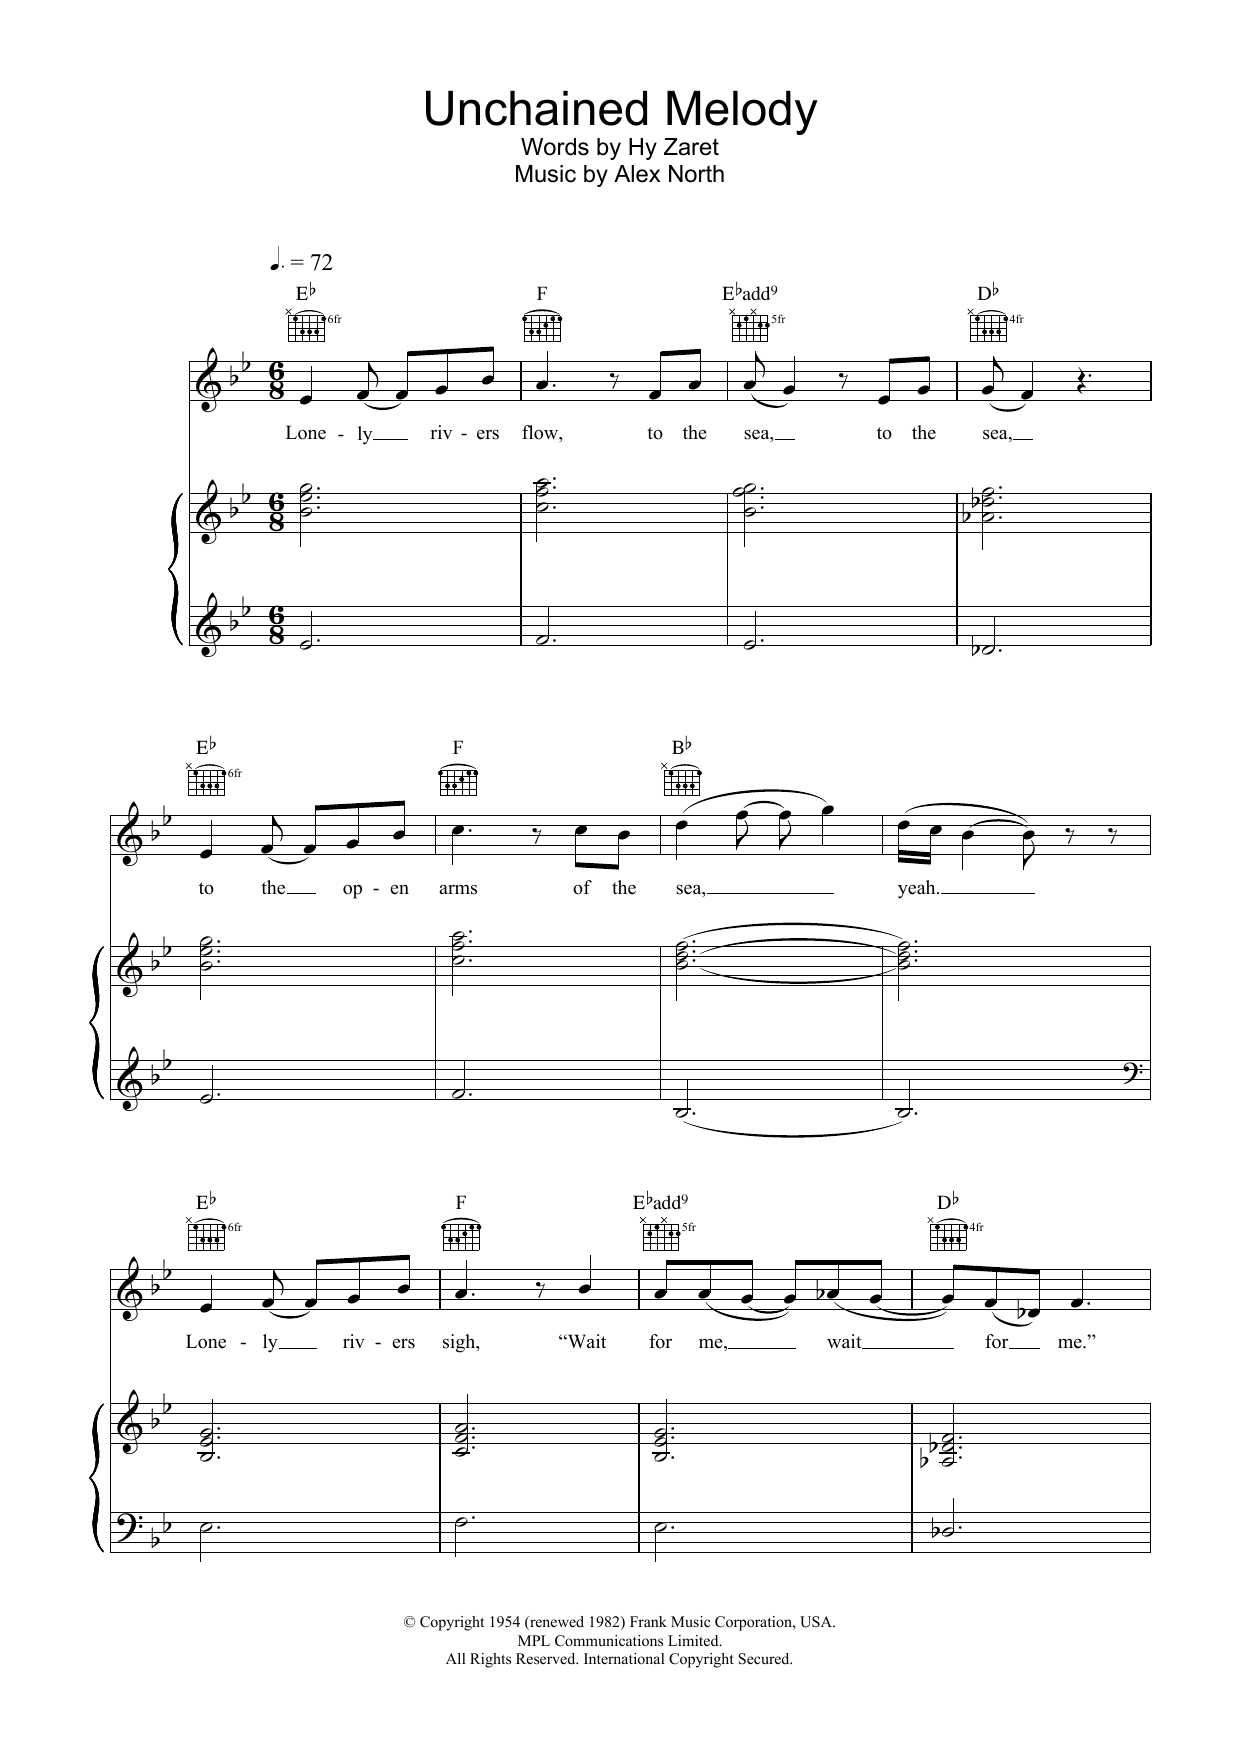 Download Gareth Gates Unchained Melody Sheet Music